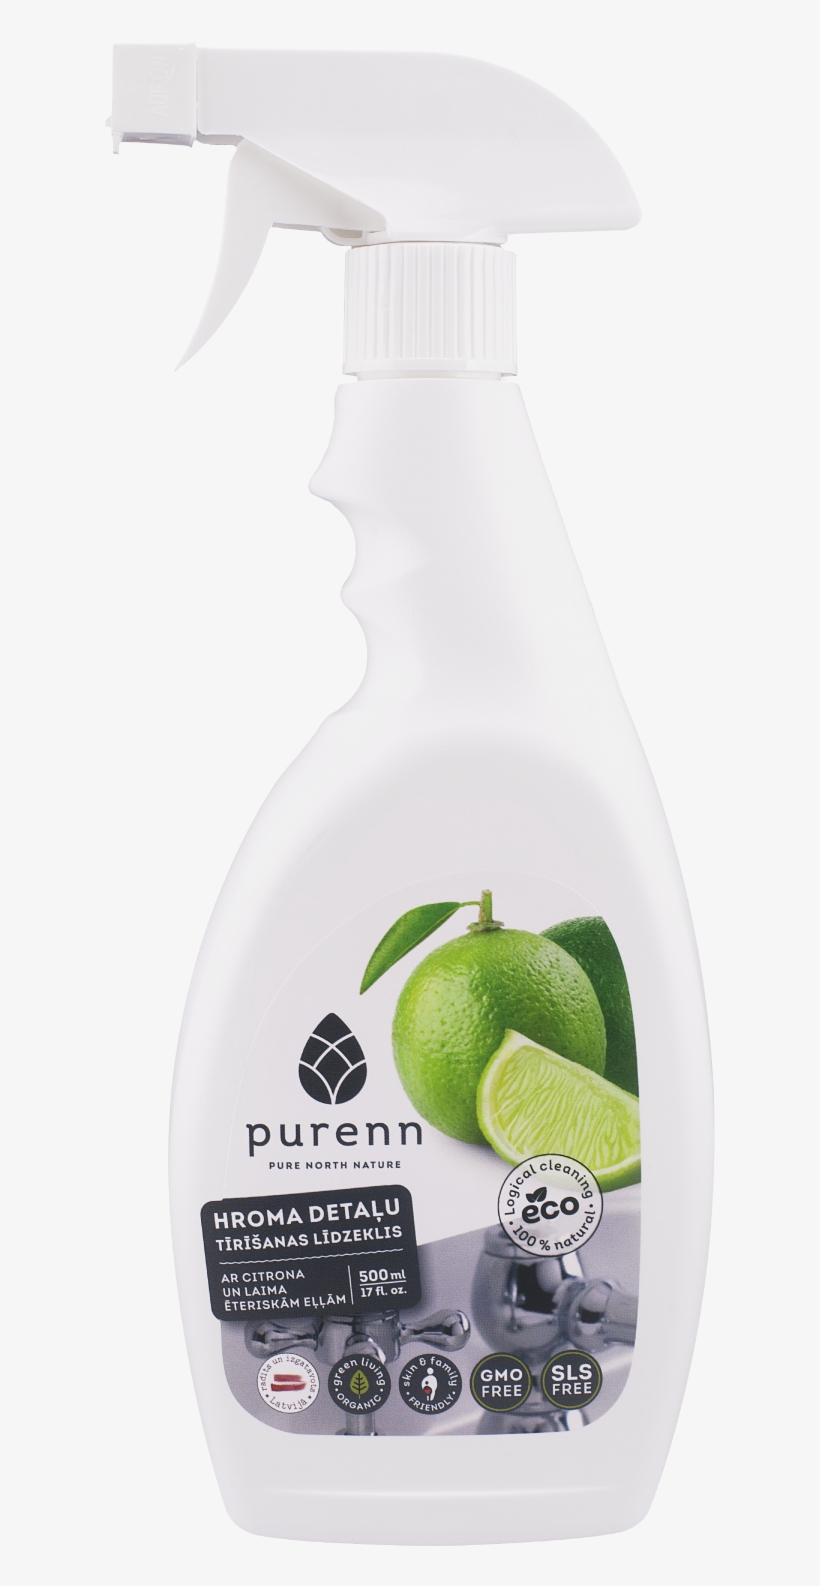 Purenn Cleaner For Taps And Chrome Details With Lemon - Lime, transparent png #8550327